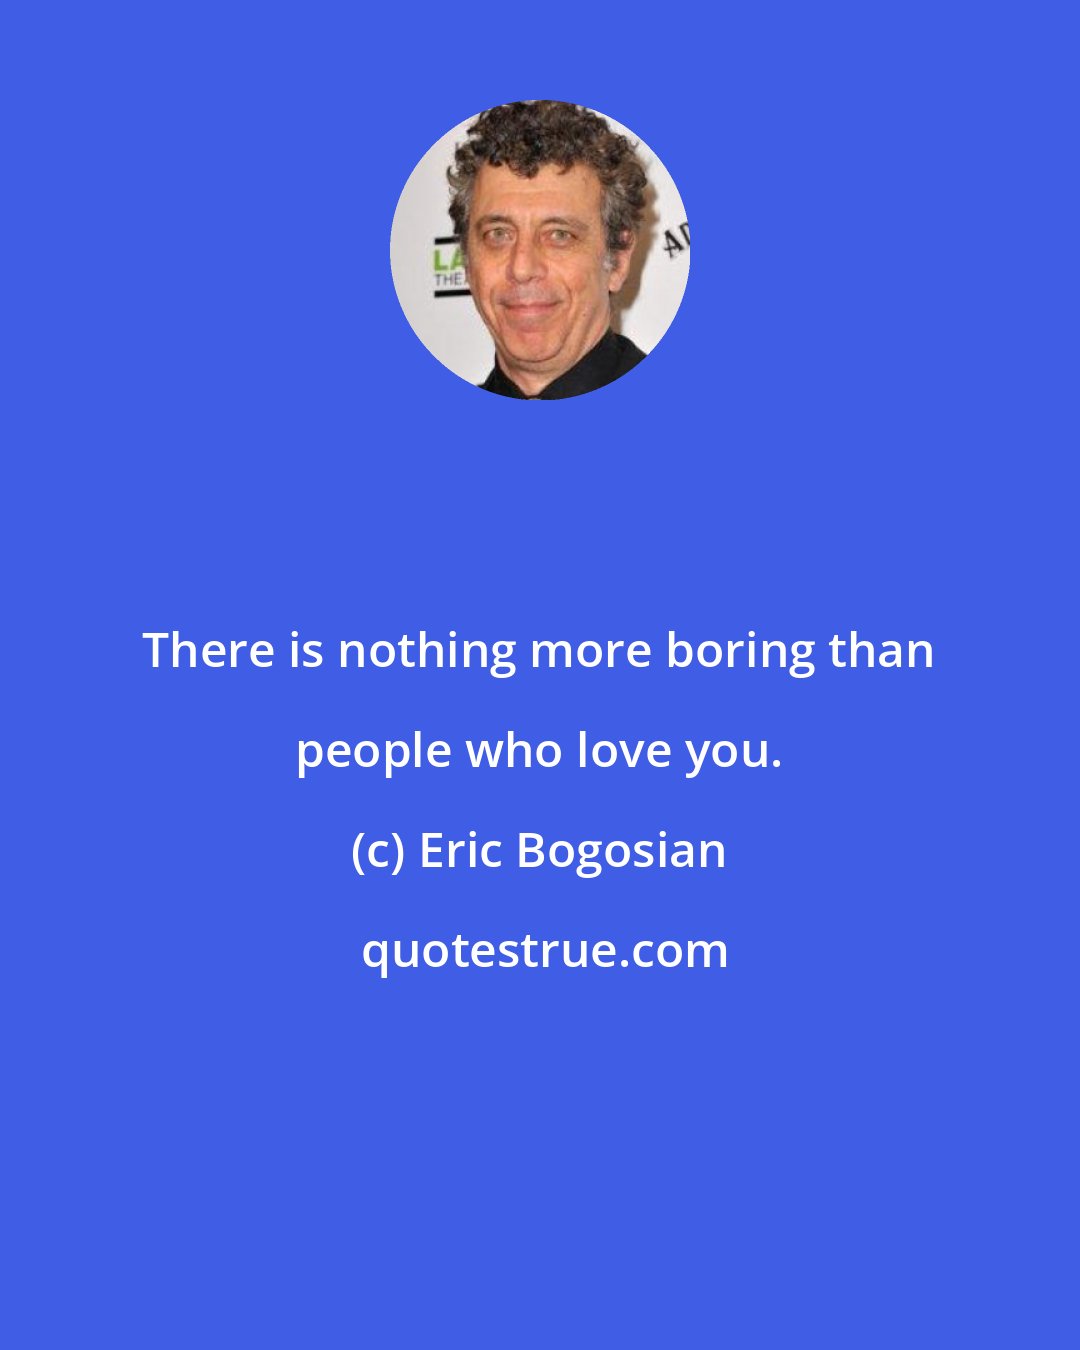 Eric Bogosian: There is nothing more boring than people who love you.